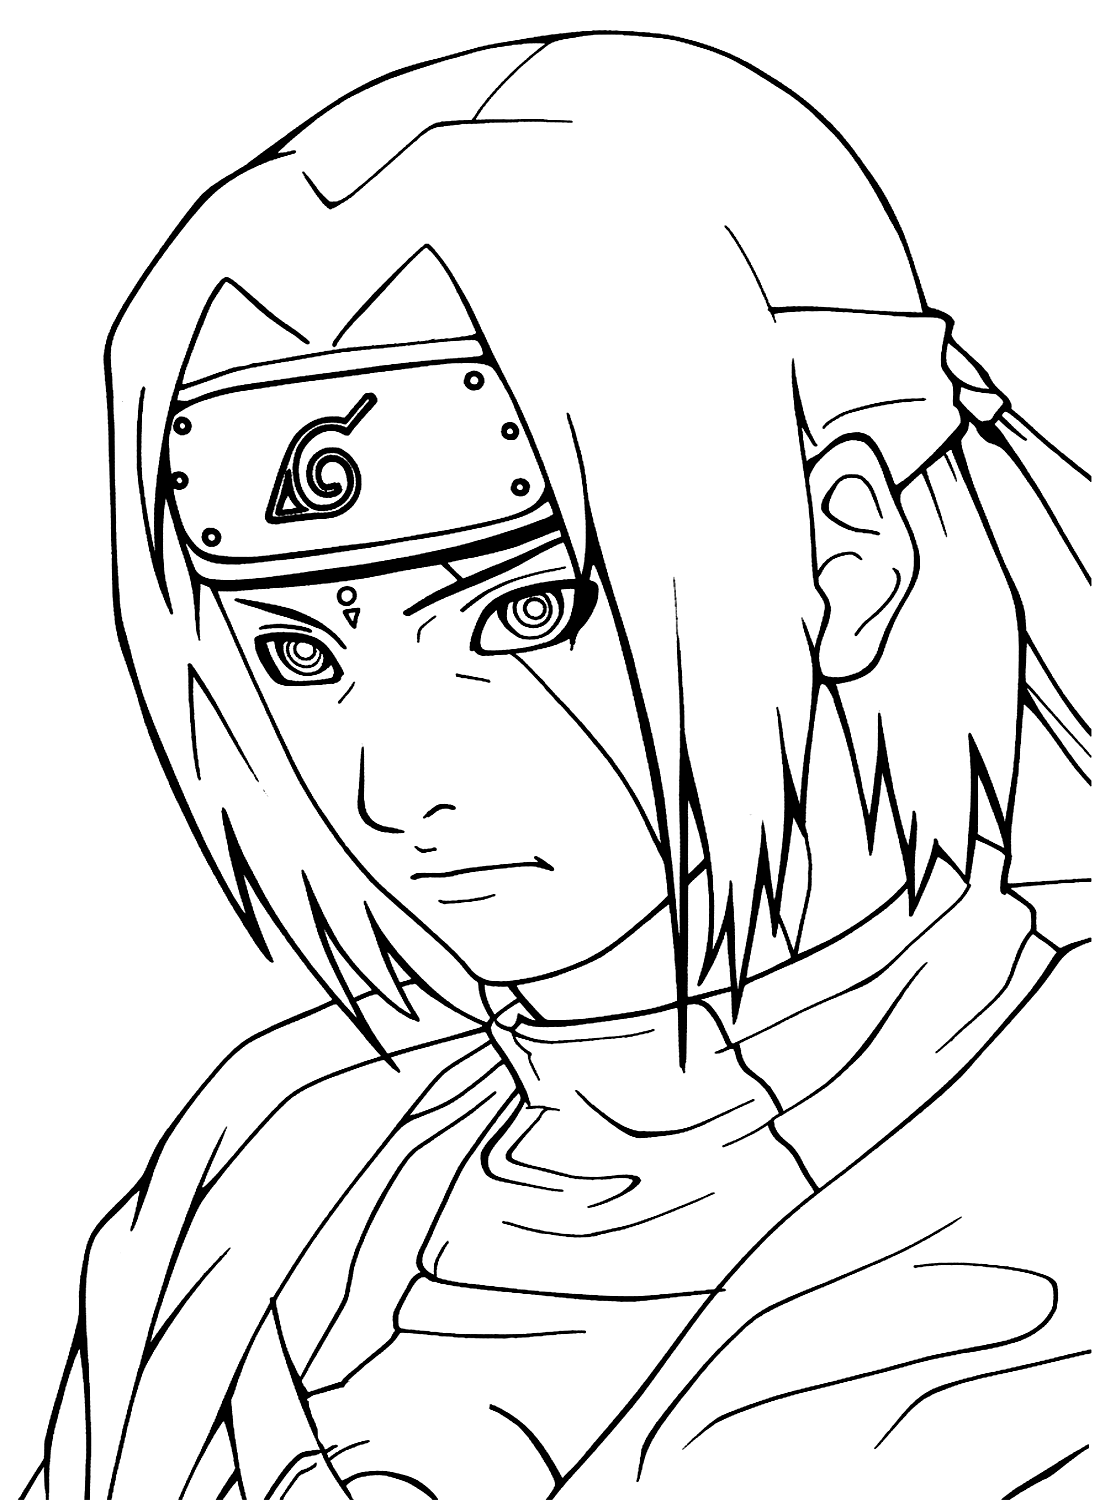 Uchiha Itachi from Naruto Coloring Page - Free Printable Coloring Pages